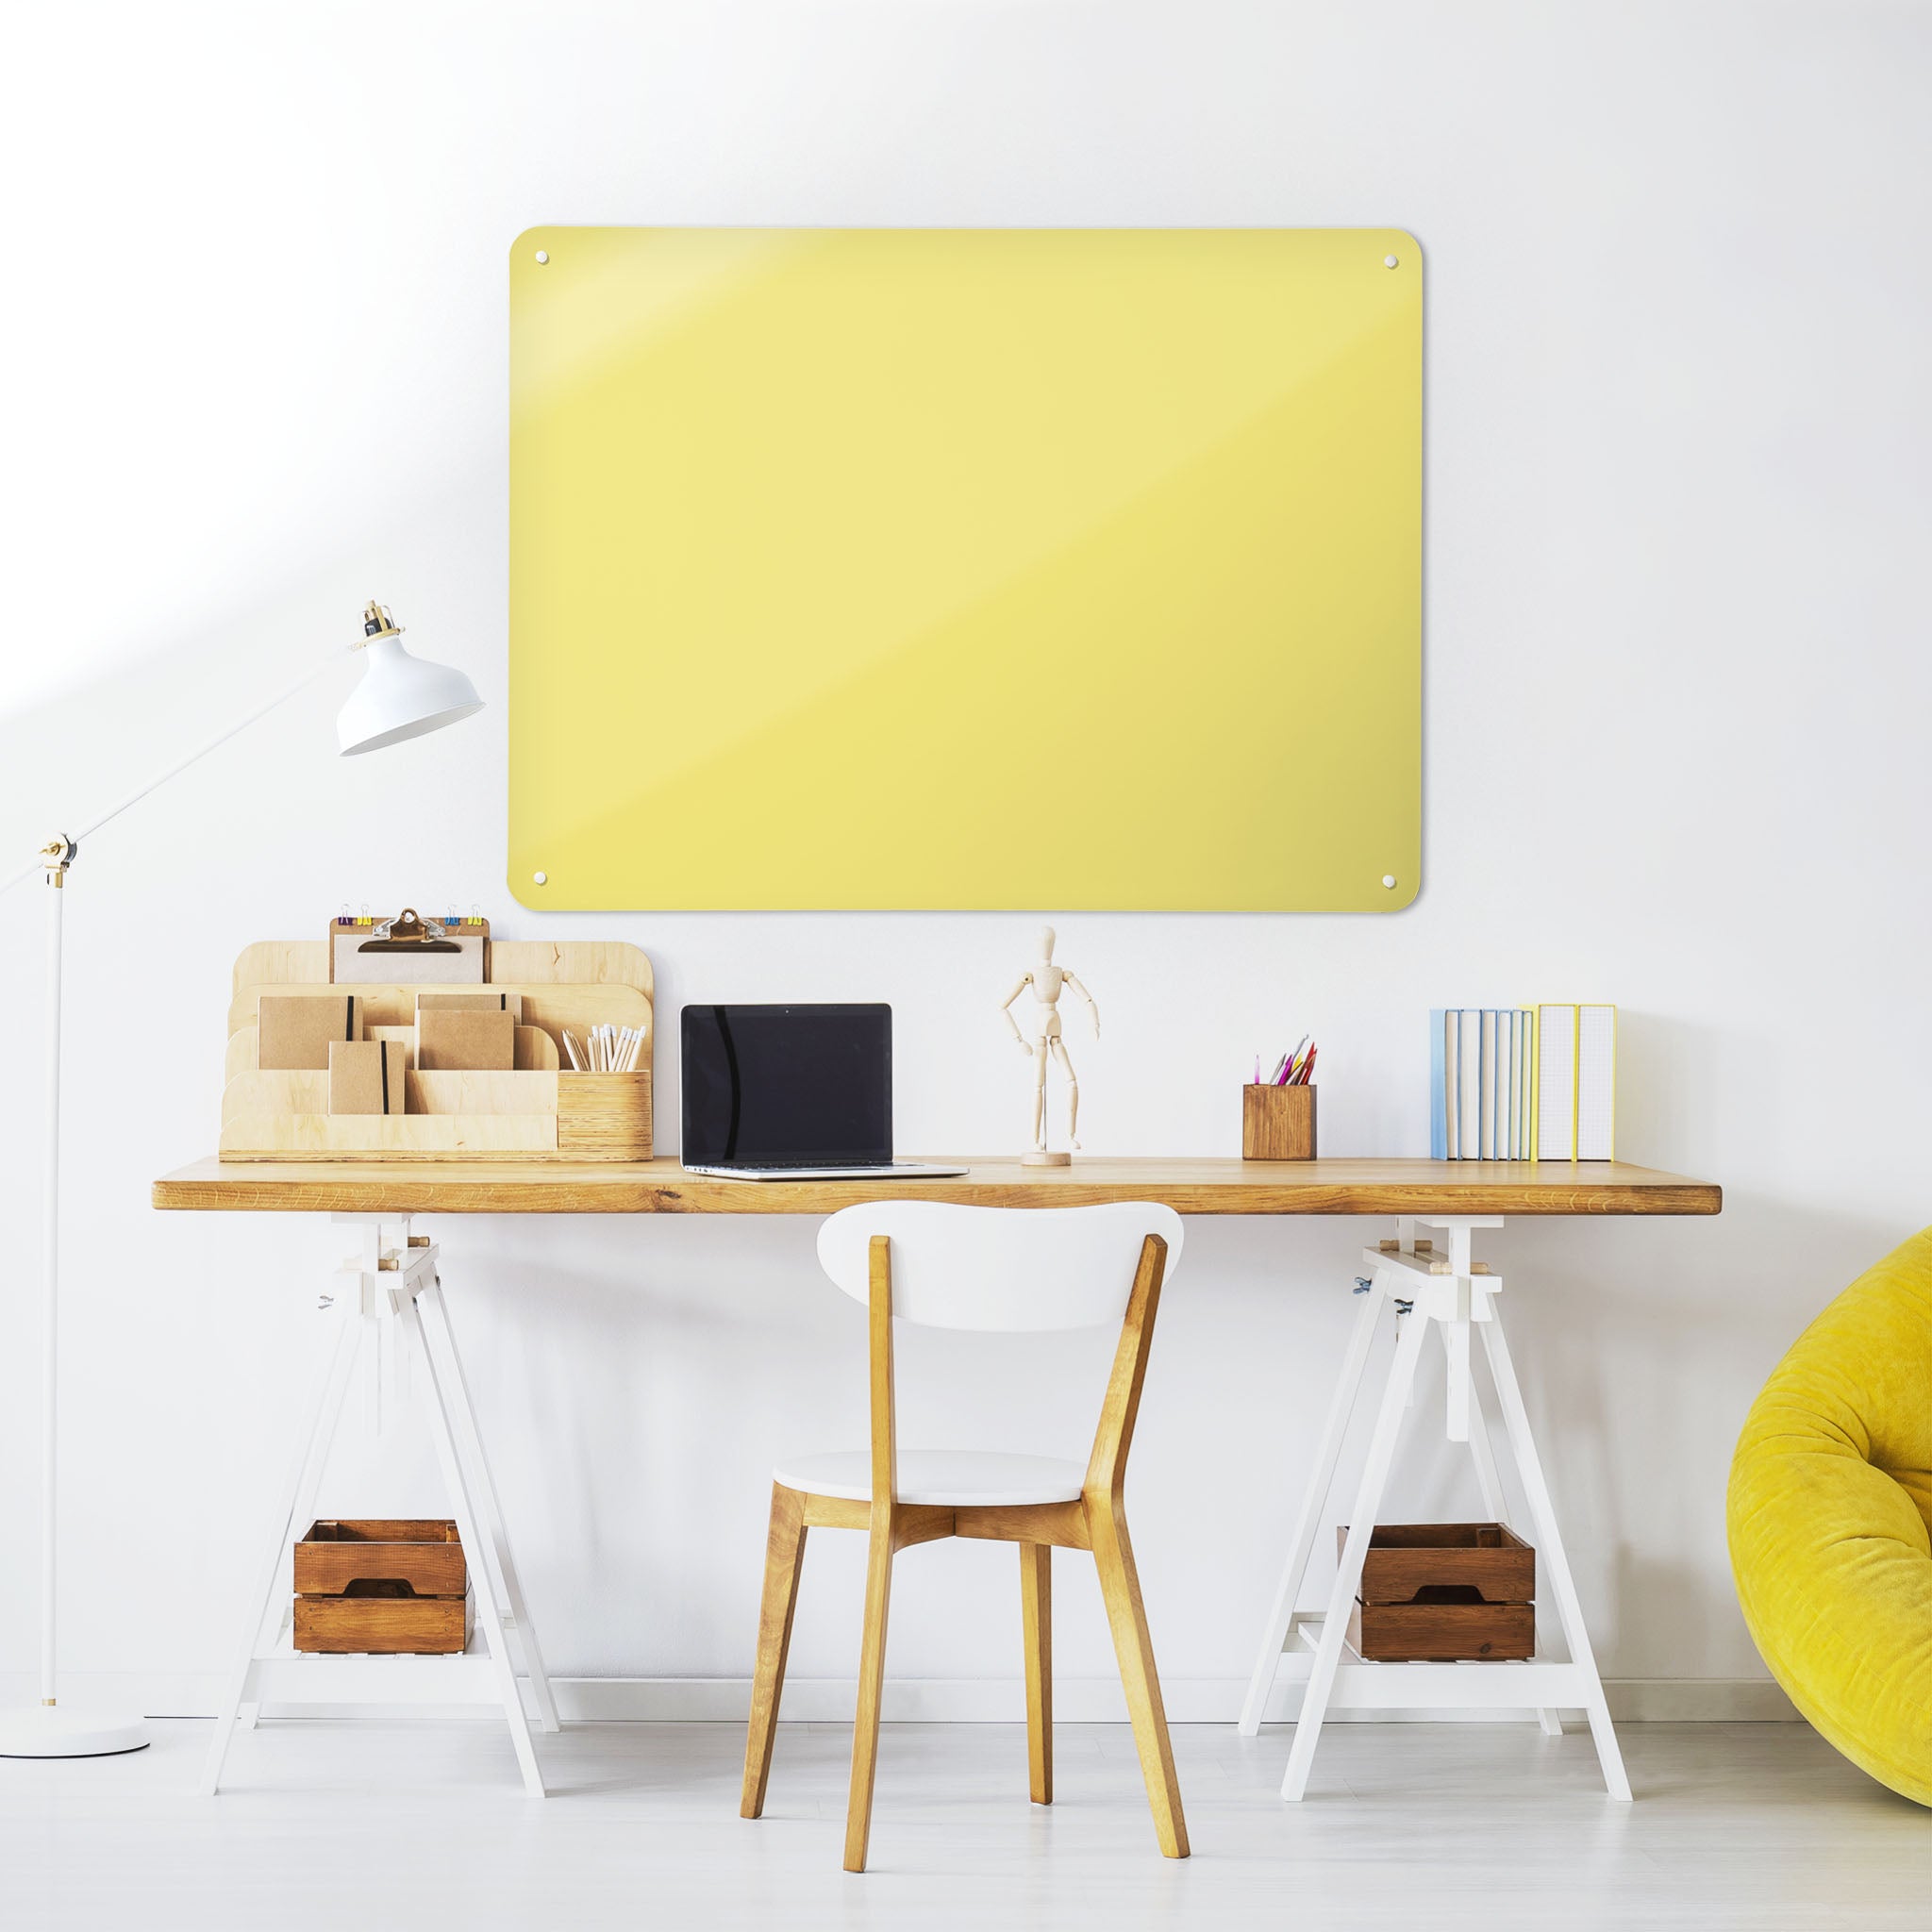 A desk in a workspace setting in a white interior with a plain yellow coloured magnetic metal wall art panel 